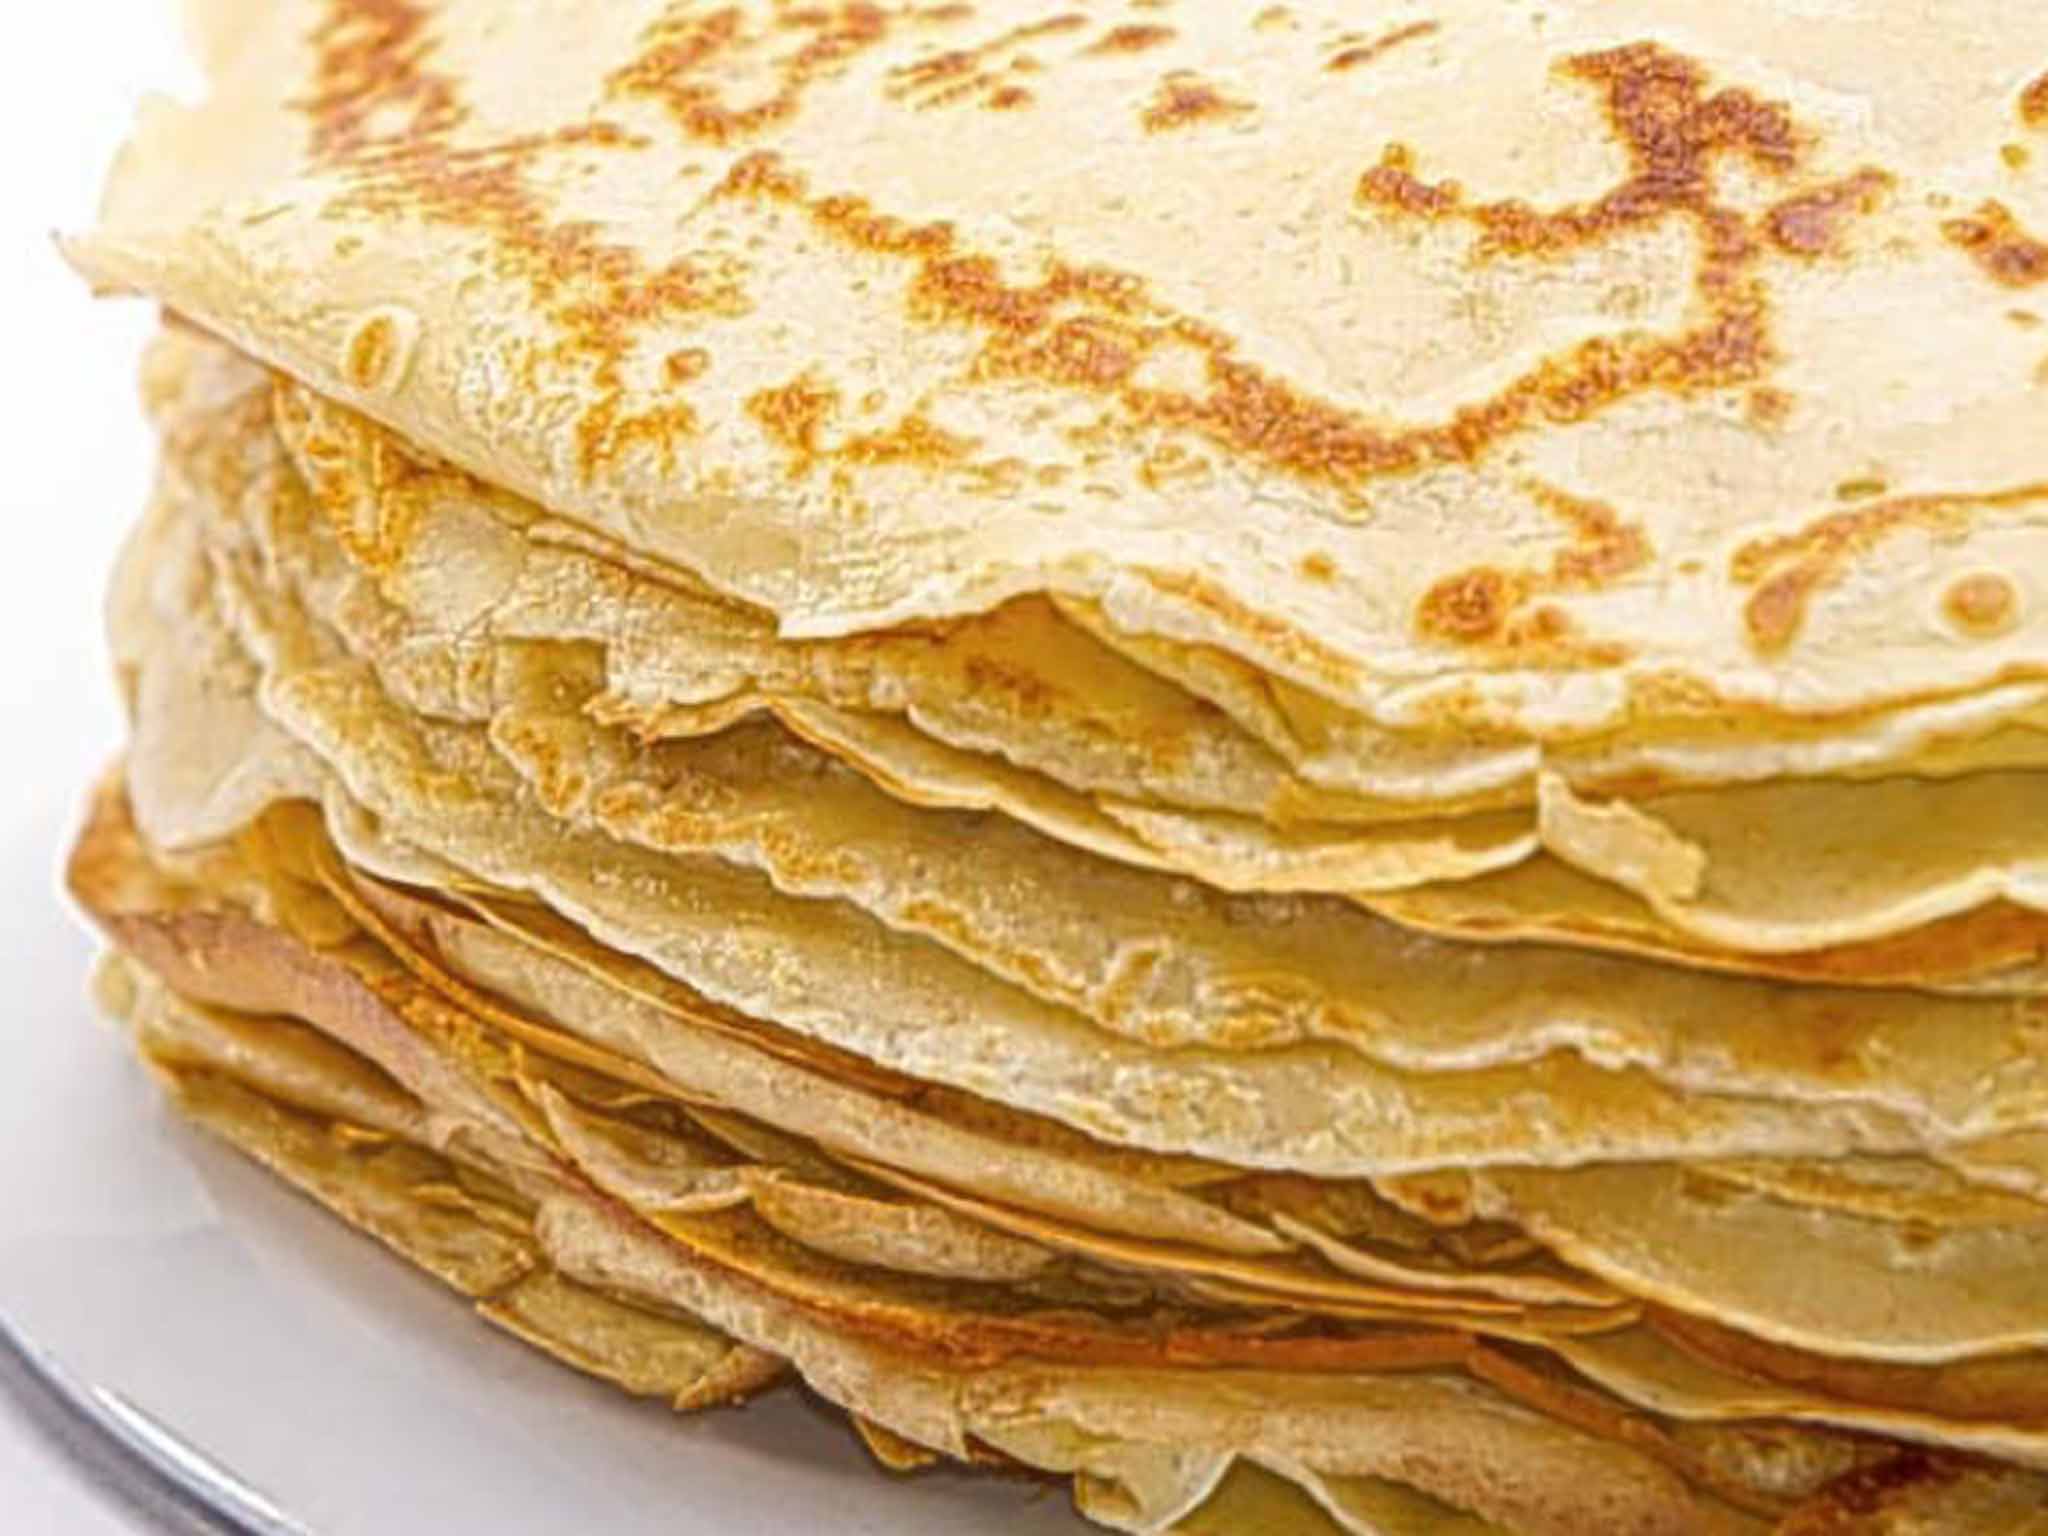 No flash in the pan: Crêpes are a firm favourite